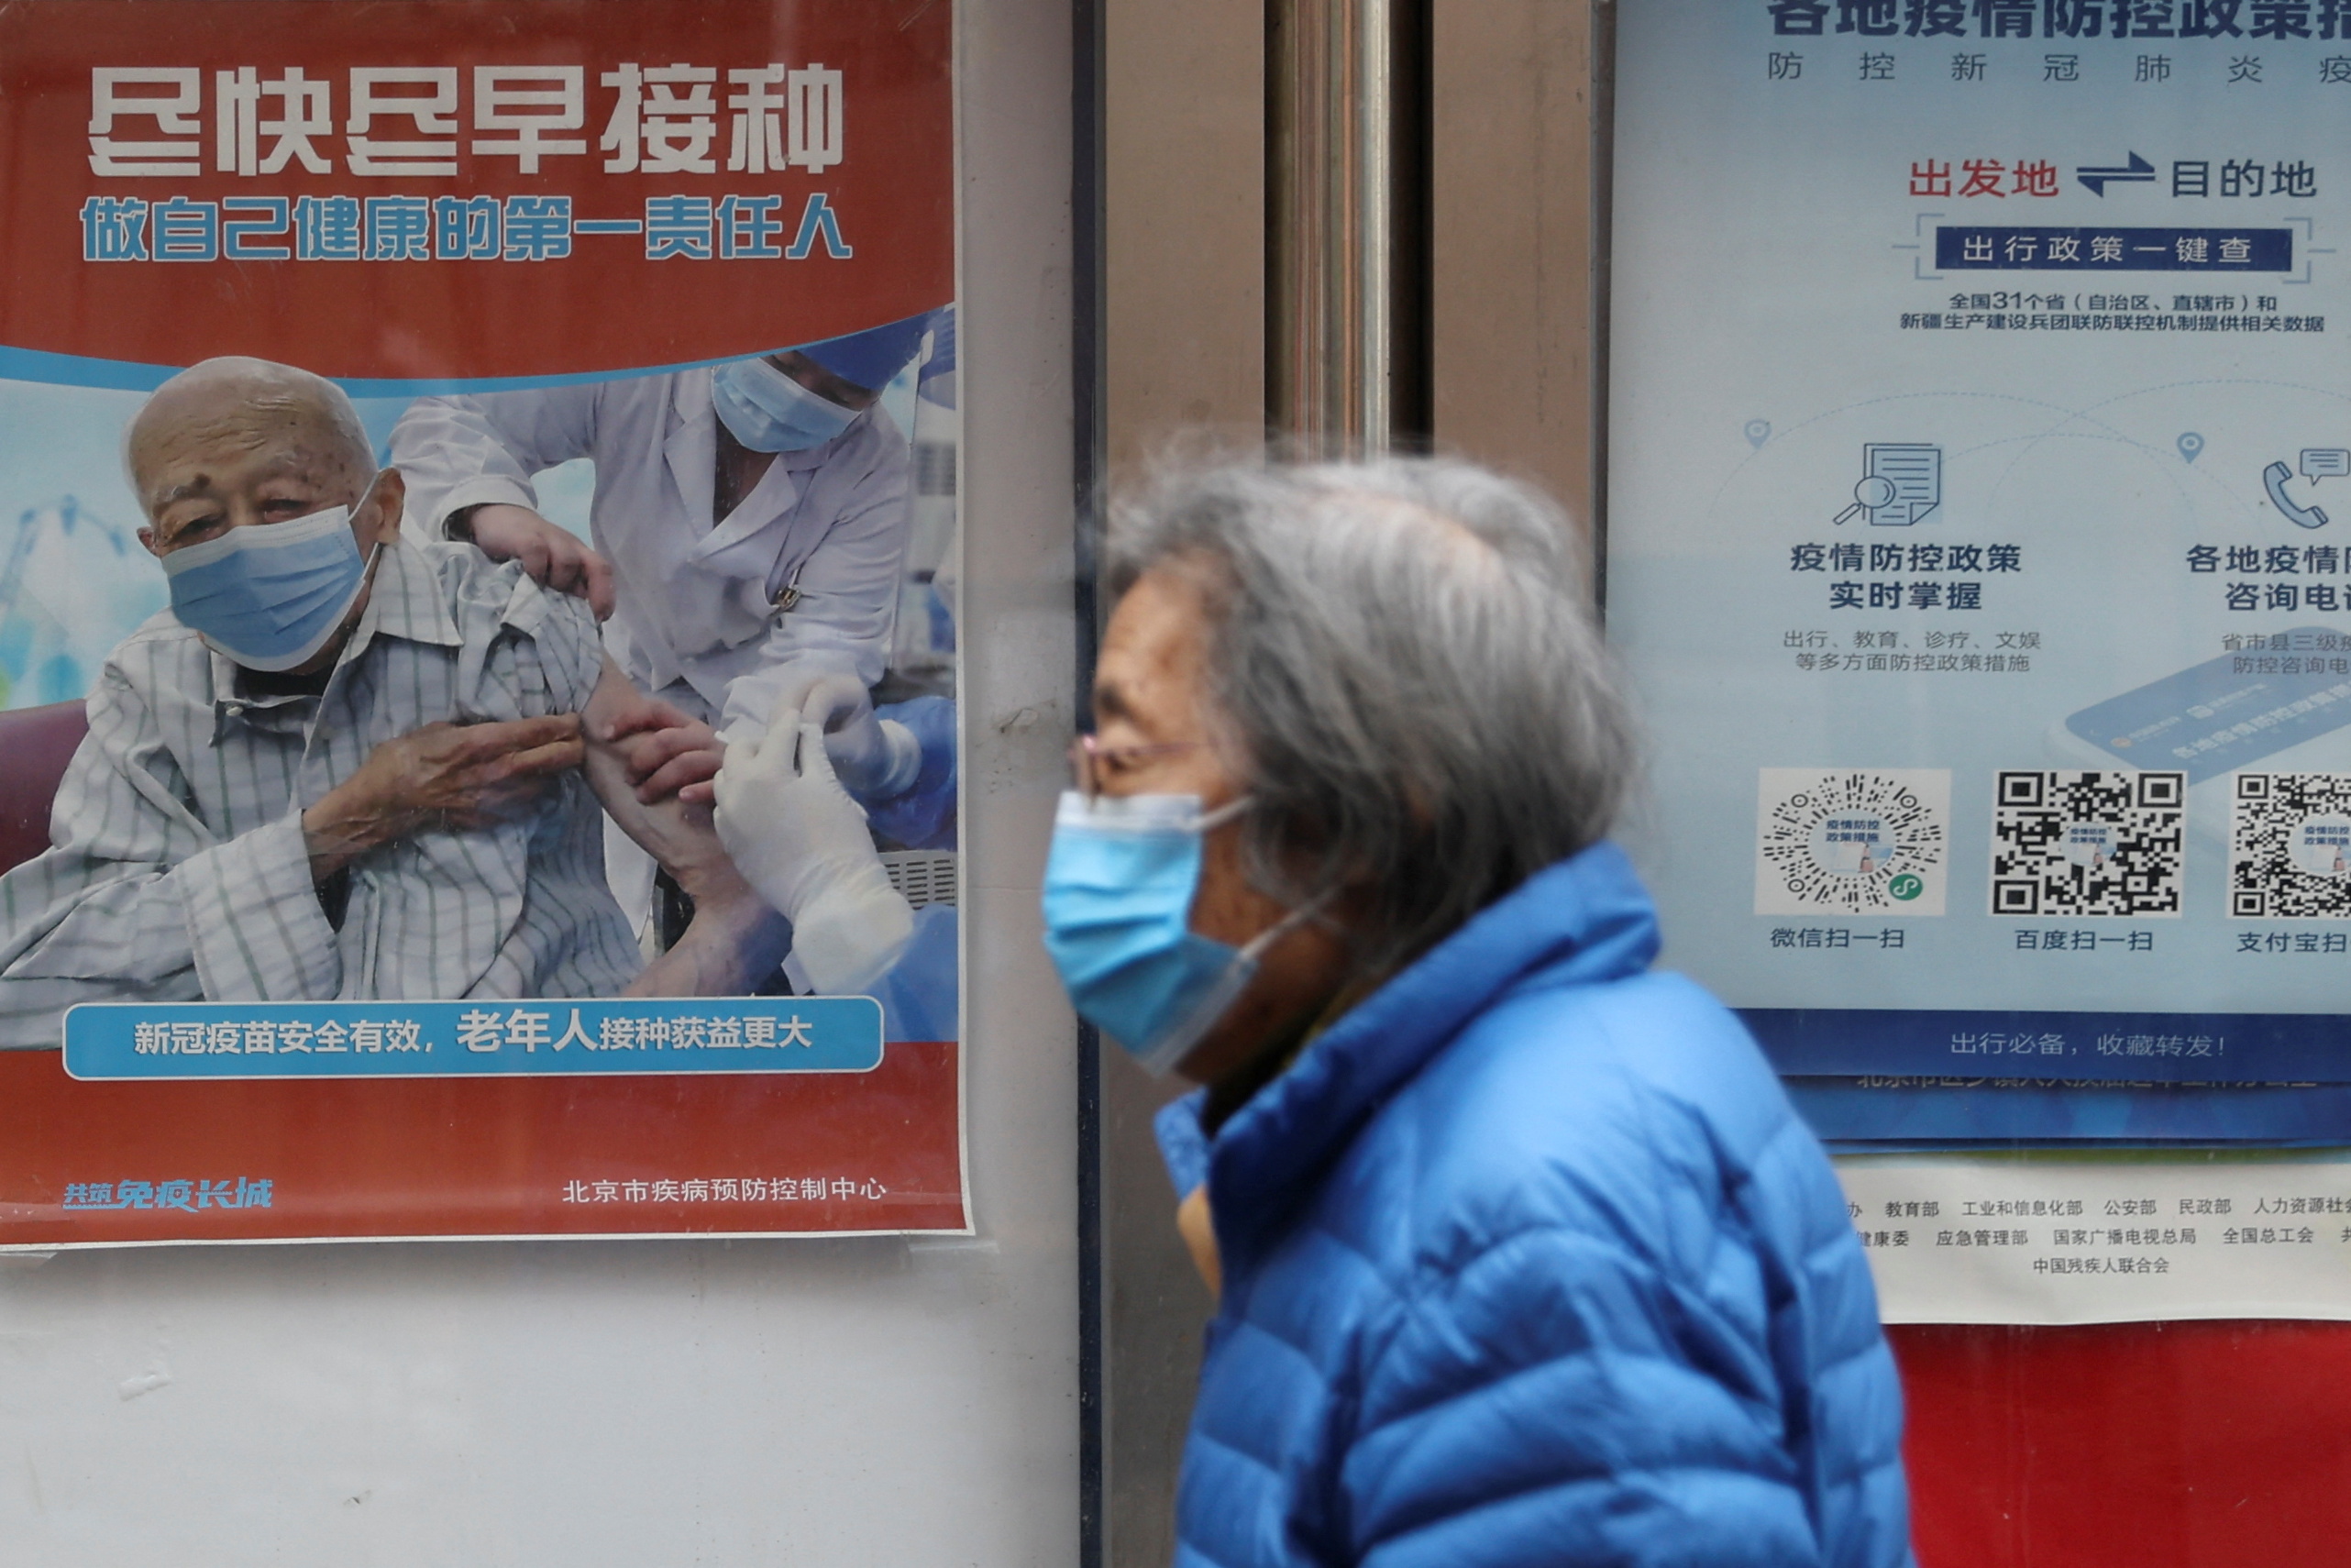 A person walks past a poster encouraging elderly people to get vaccinated against COVID-19, in Beijing